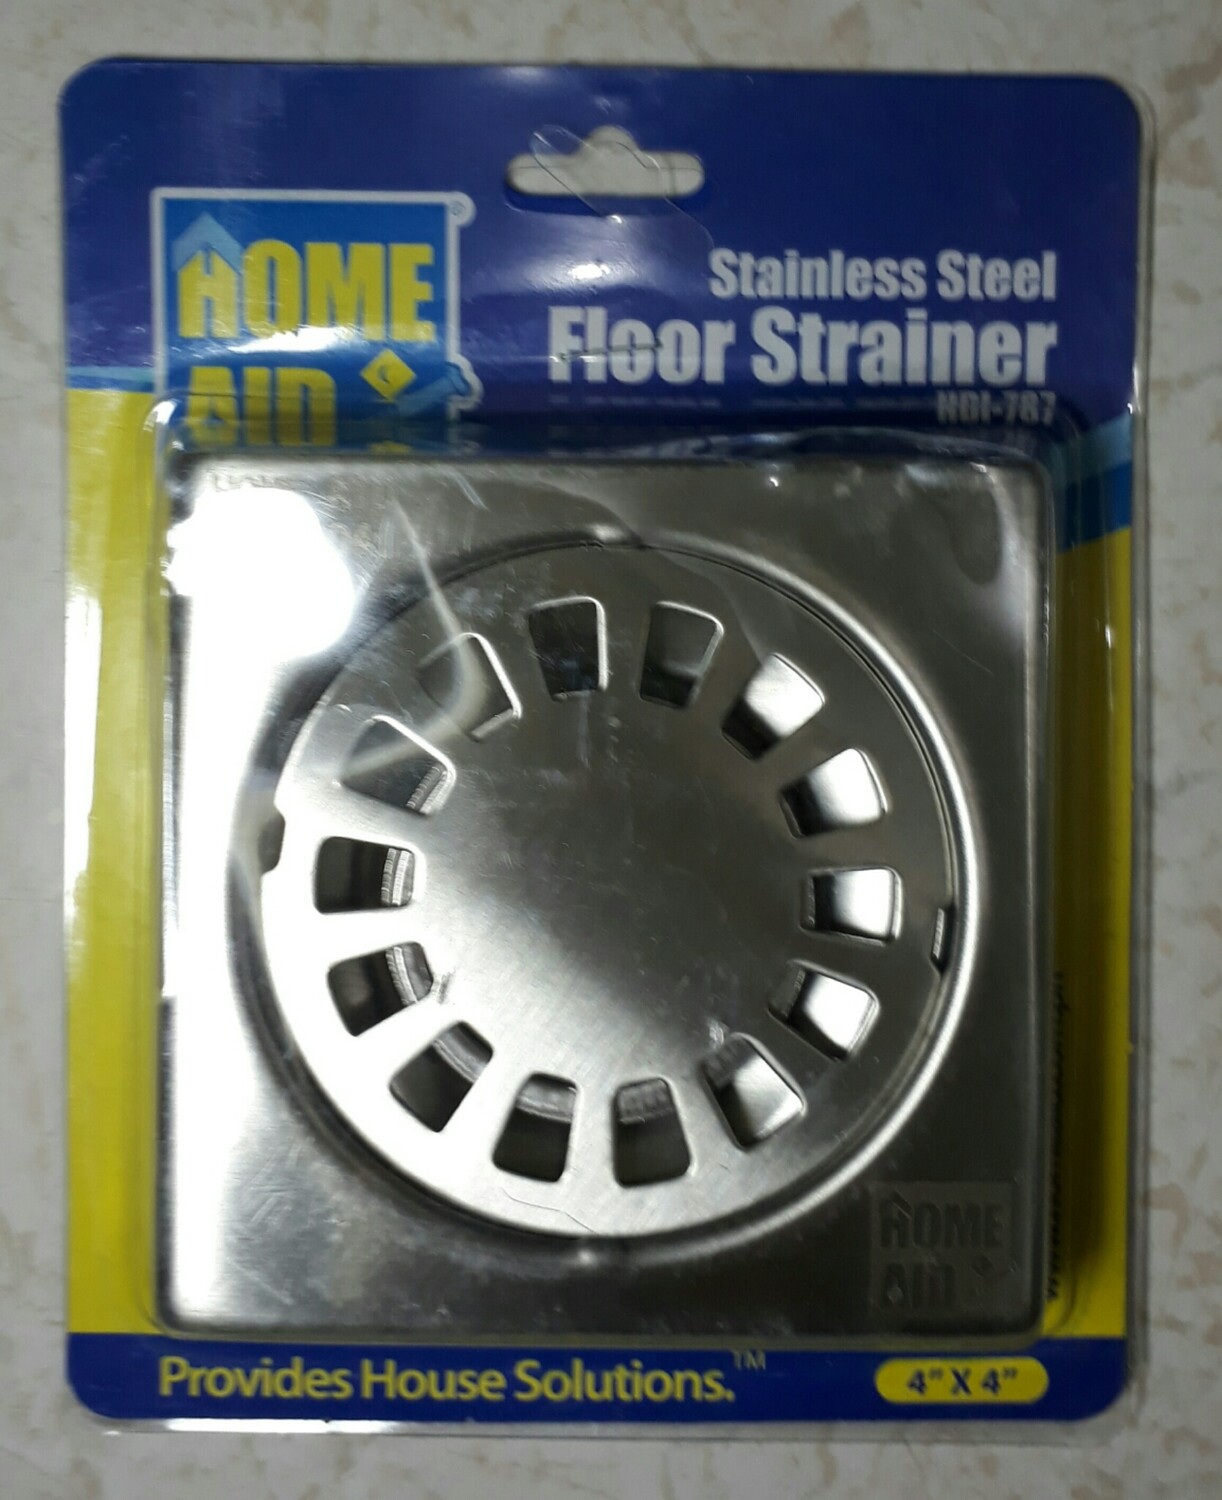 Homeaid Stainless Steel Anti Odor/Pest FLOOR STRAINER 4" x 4" HDI-787